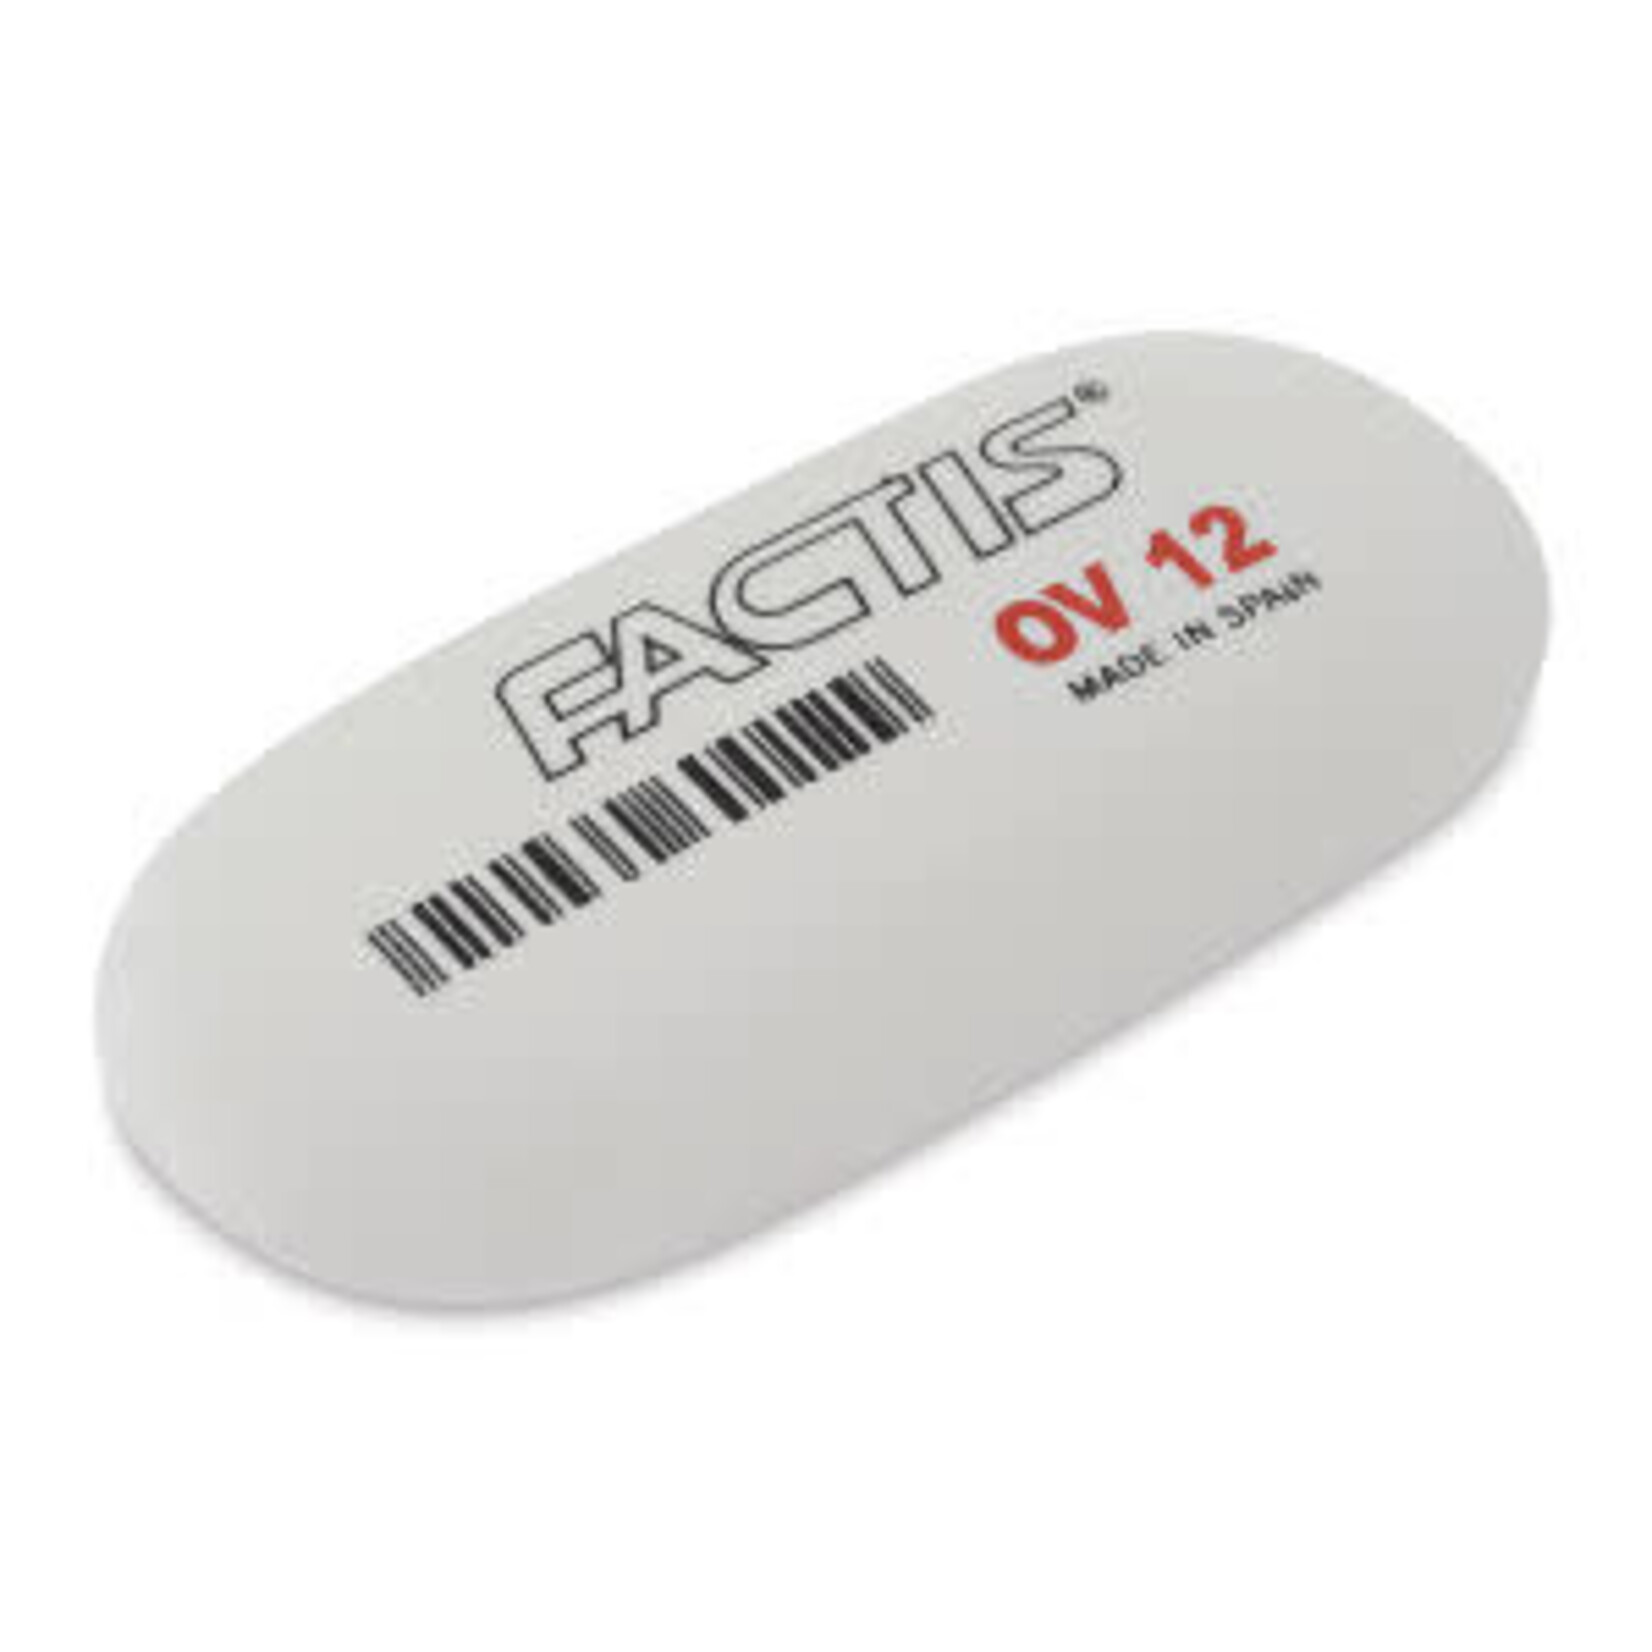 General Pencil Factis Soft Oval Soap Eraser Small